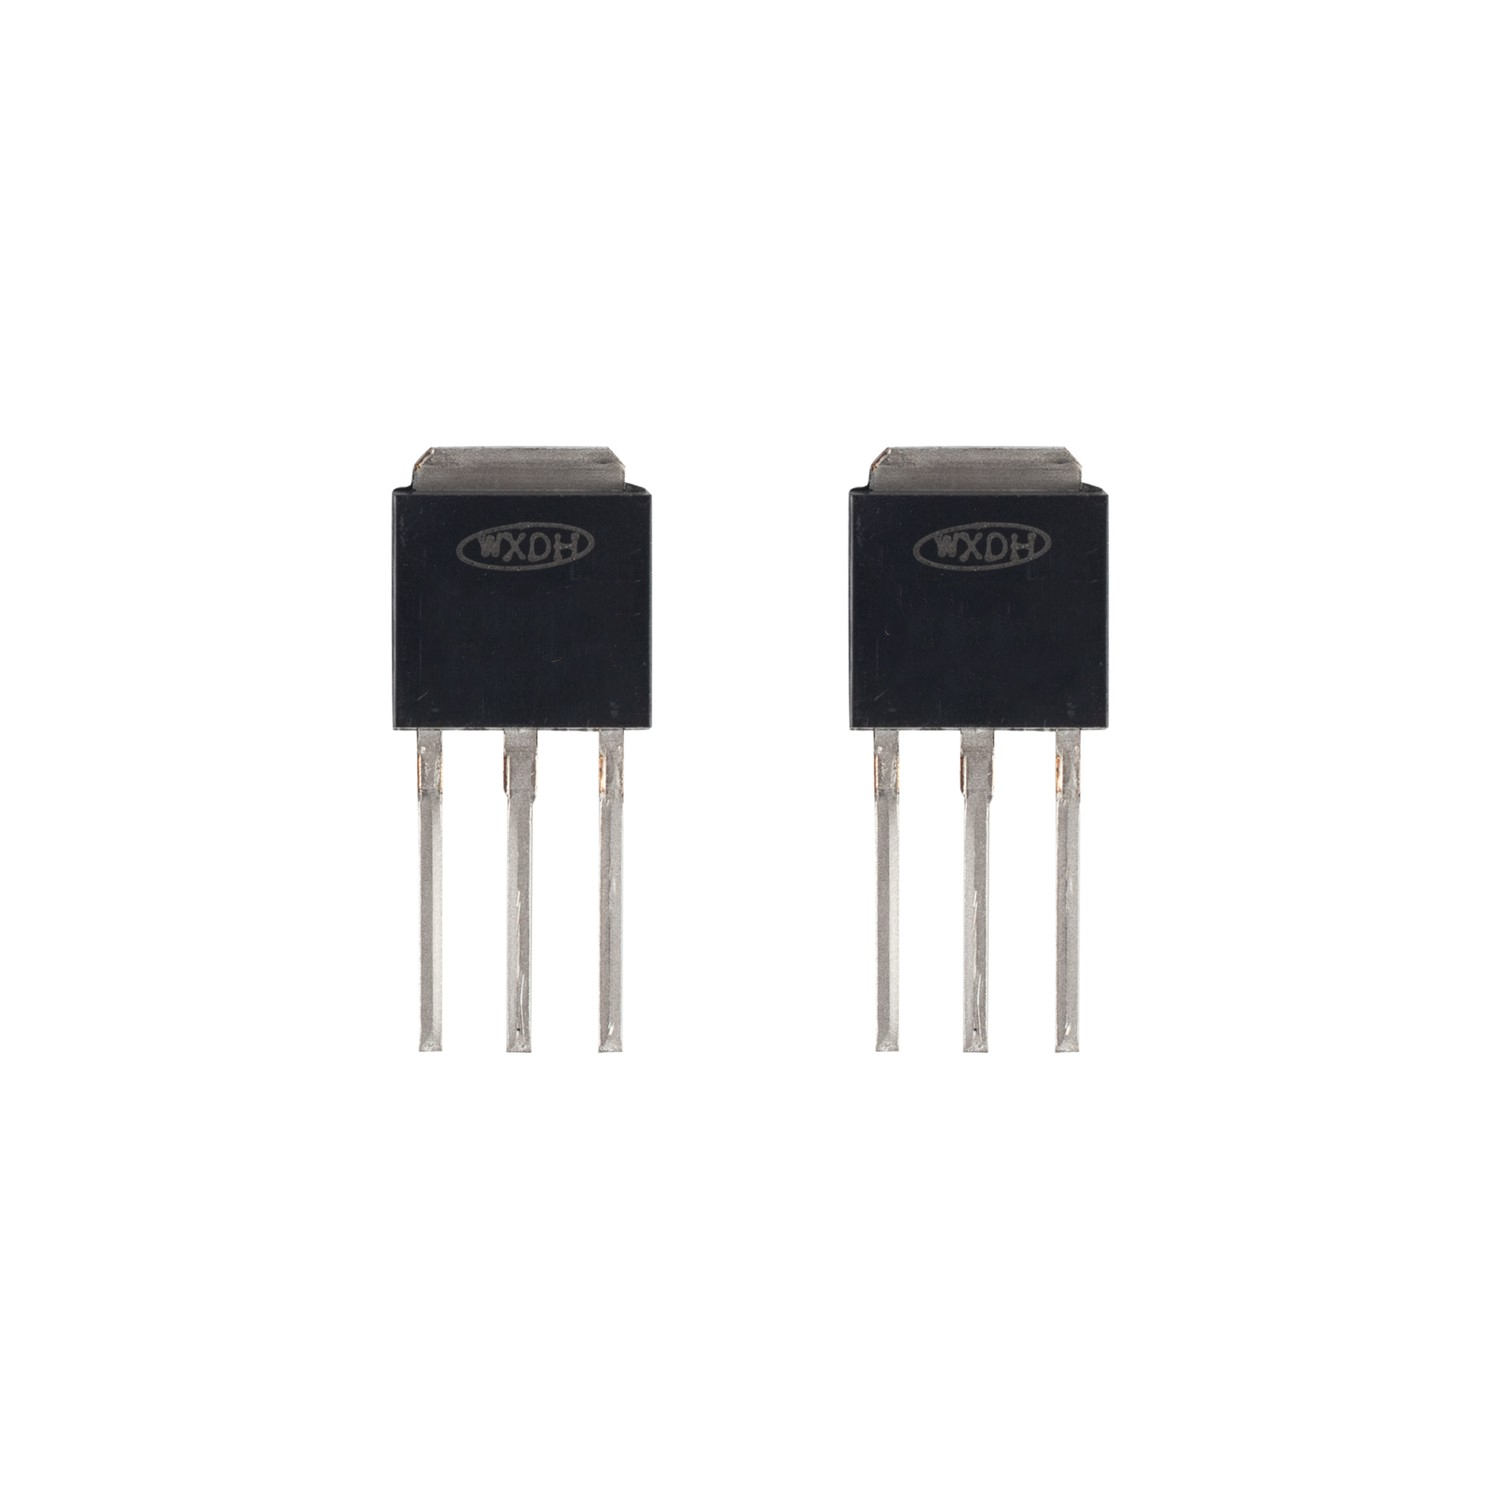 15A 100V N-channel Enhancement Mode Power MOSFET